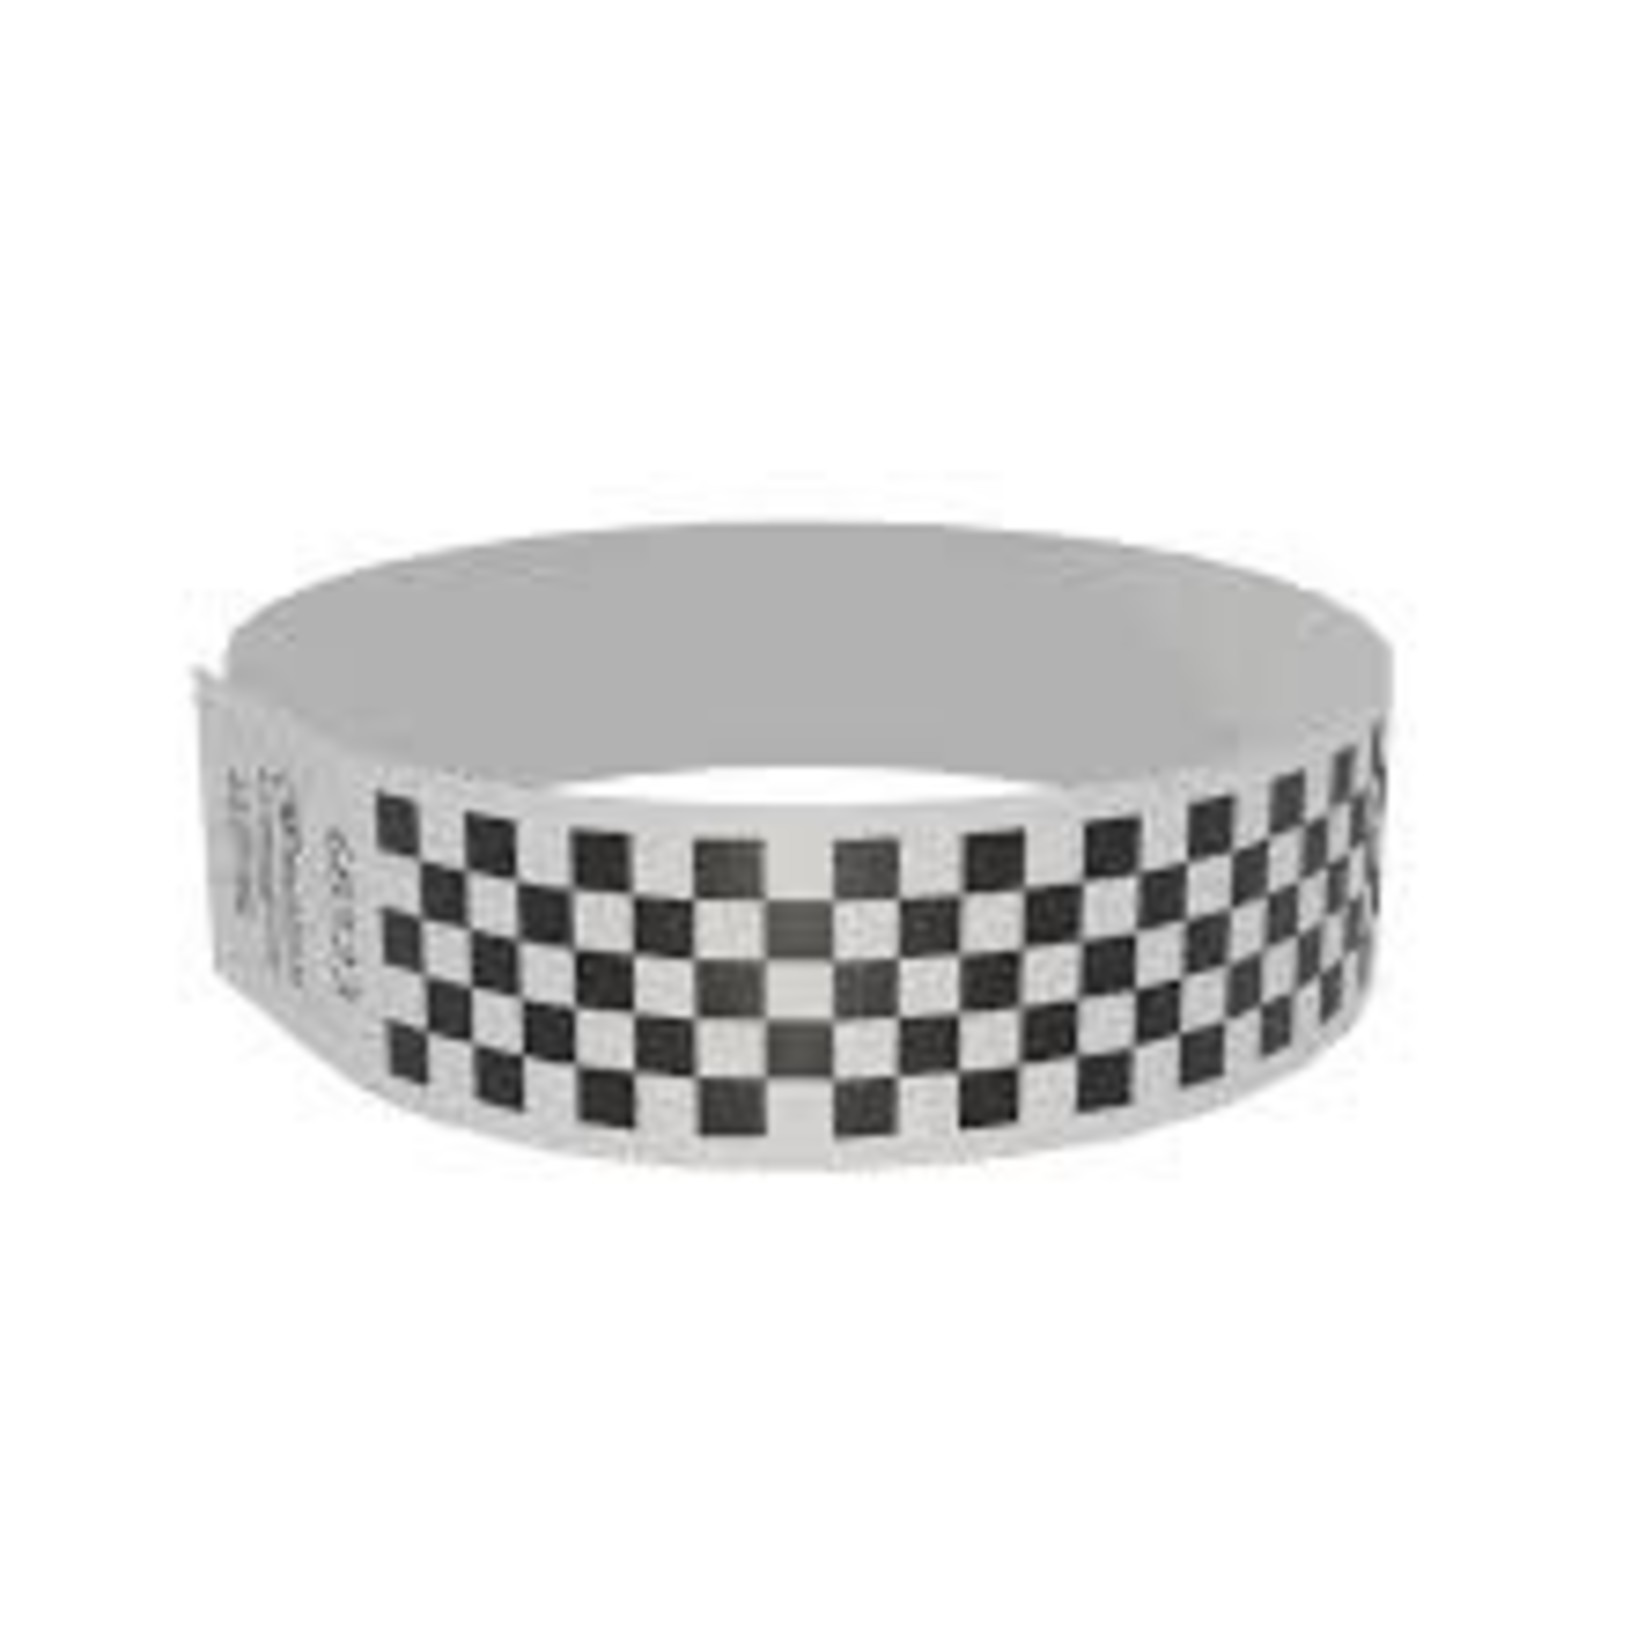 MedTech Wristbands Black & White Check Adhesive Paper Wristbands - 100ct.